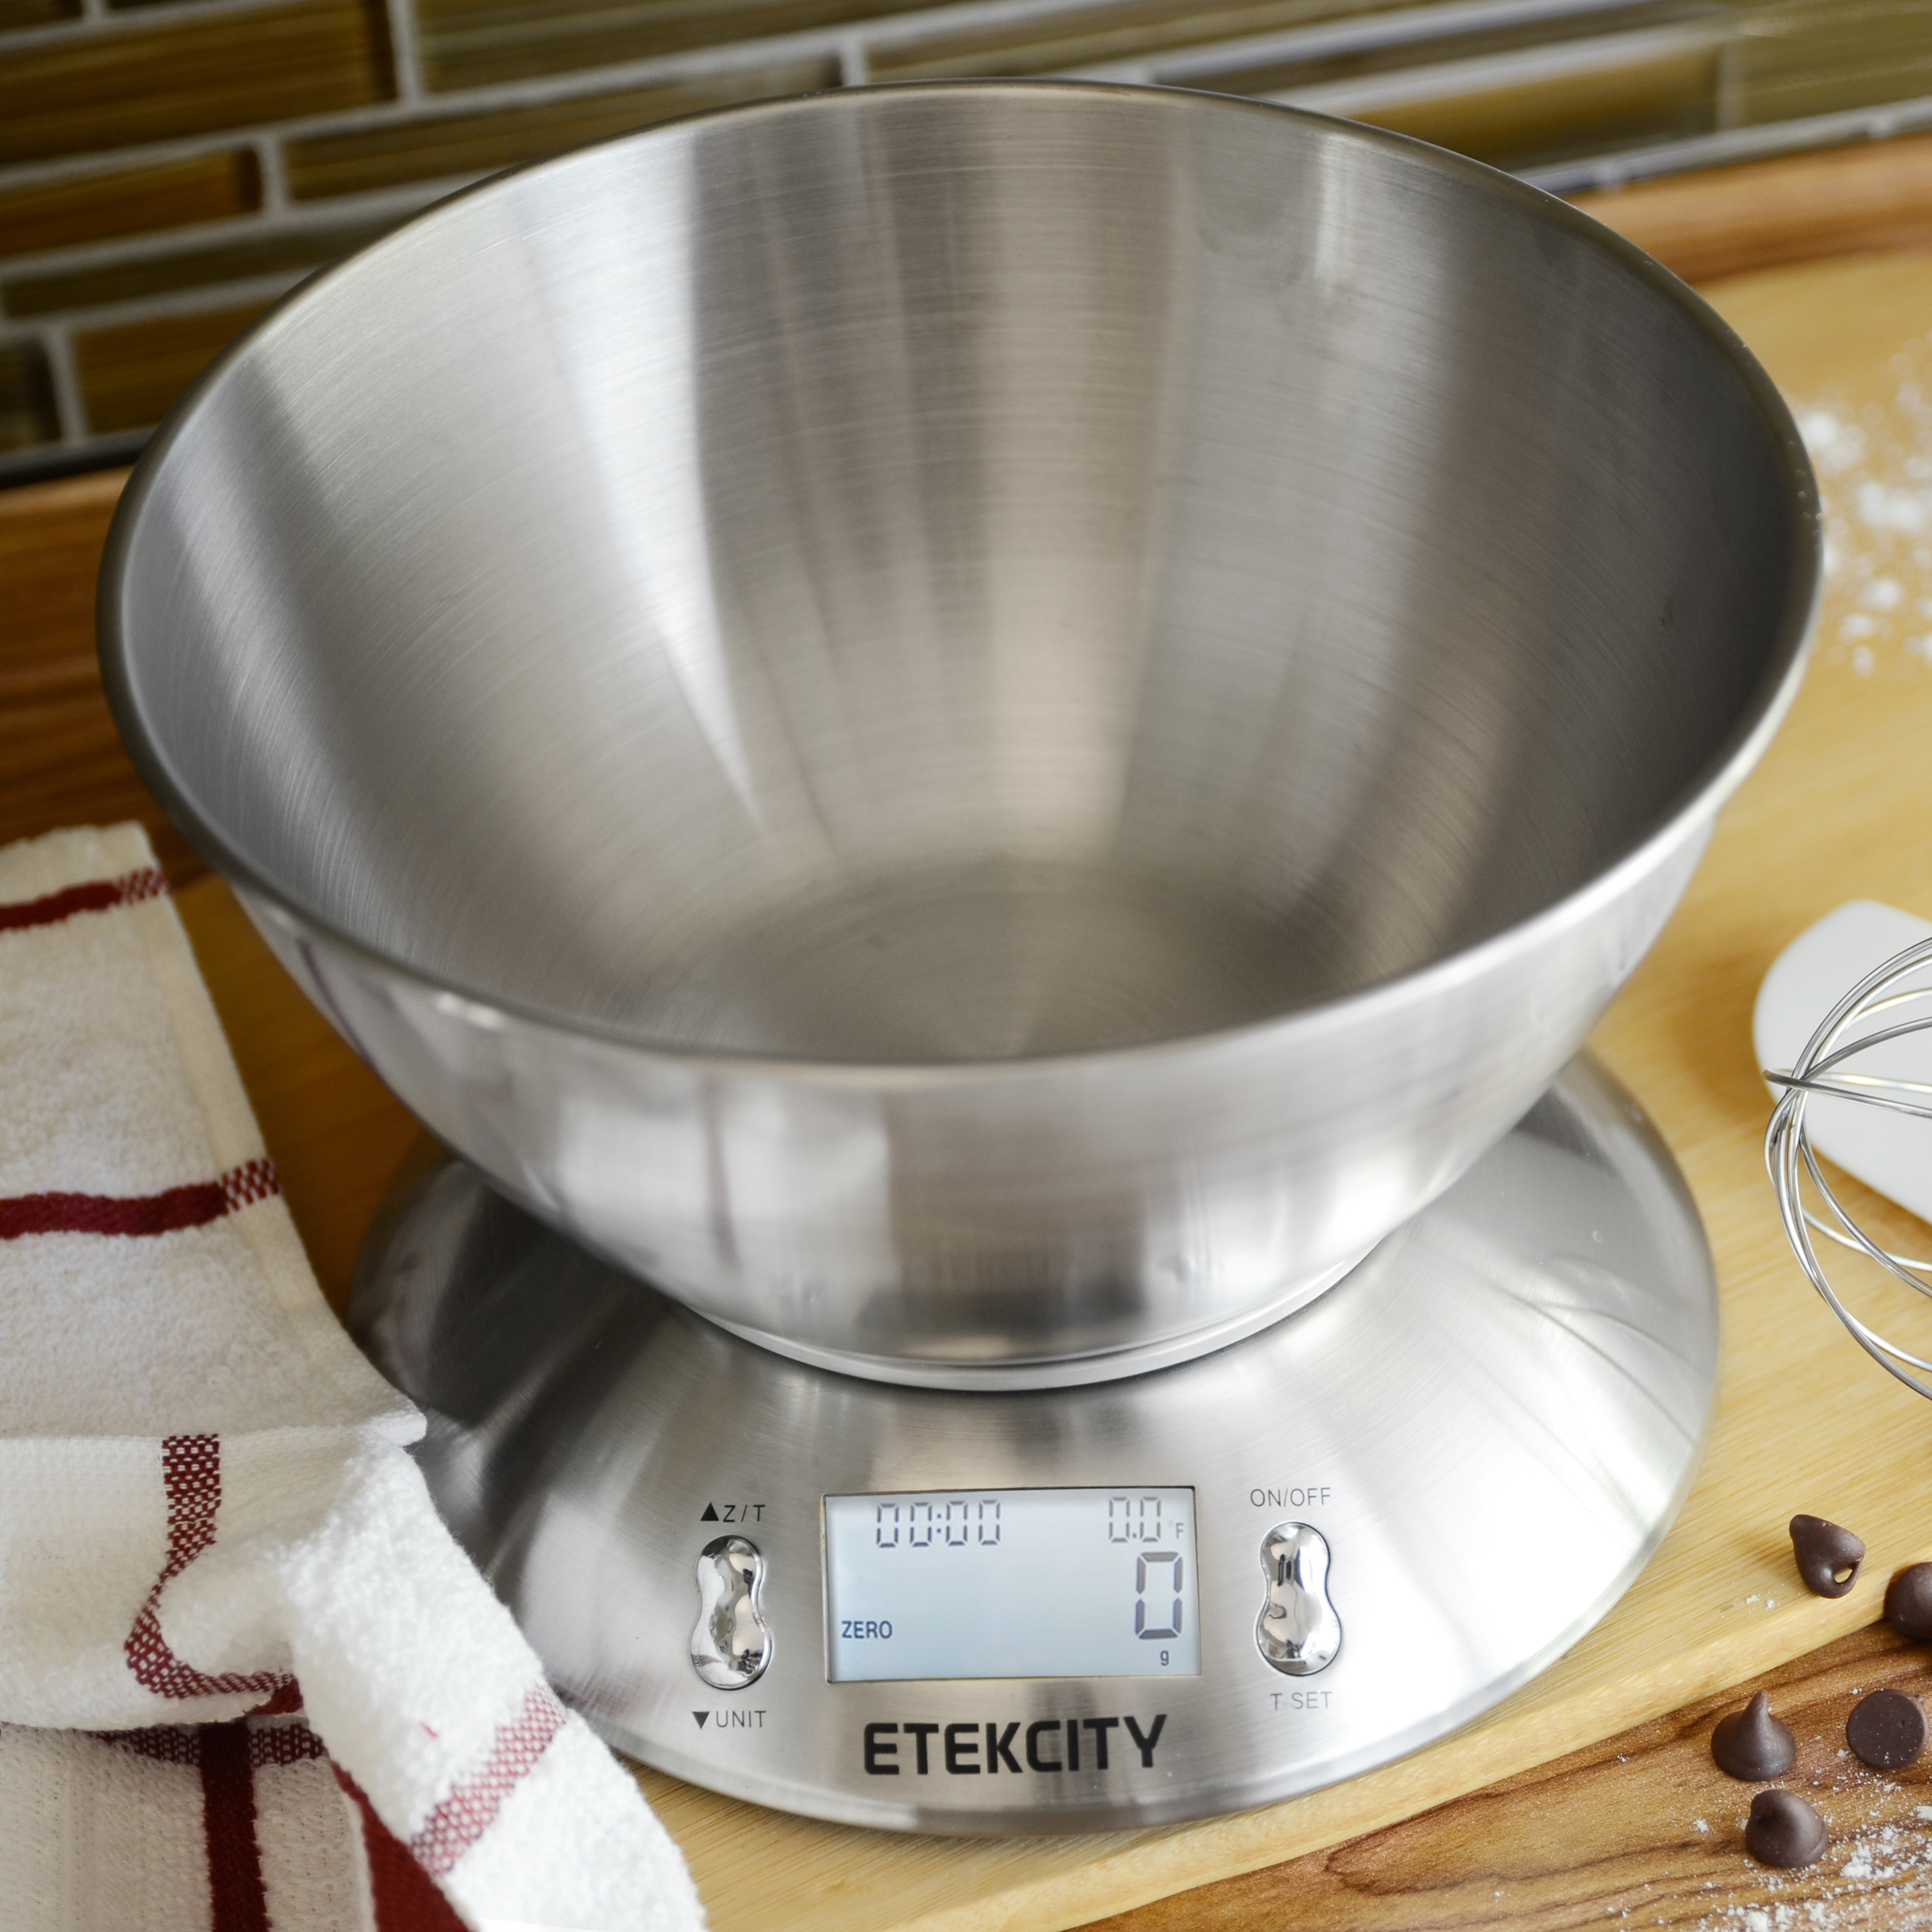 Etekcity Kitchen Scale, Digital Food Scale, with Removable Bowl, Stainless Steel, 11lb/5kg, Silver, EK4150 - image 2 of 12